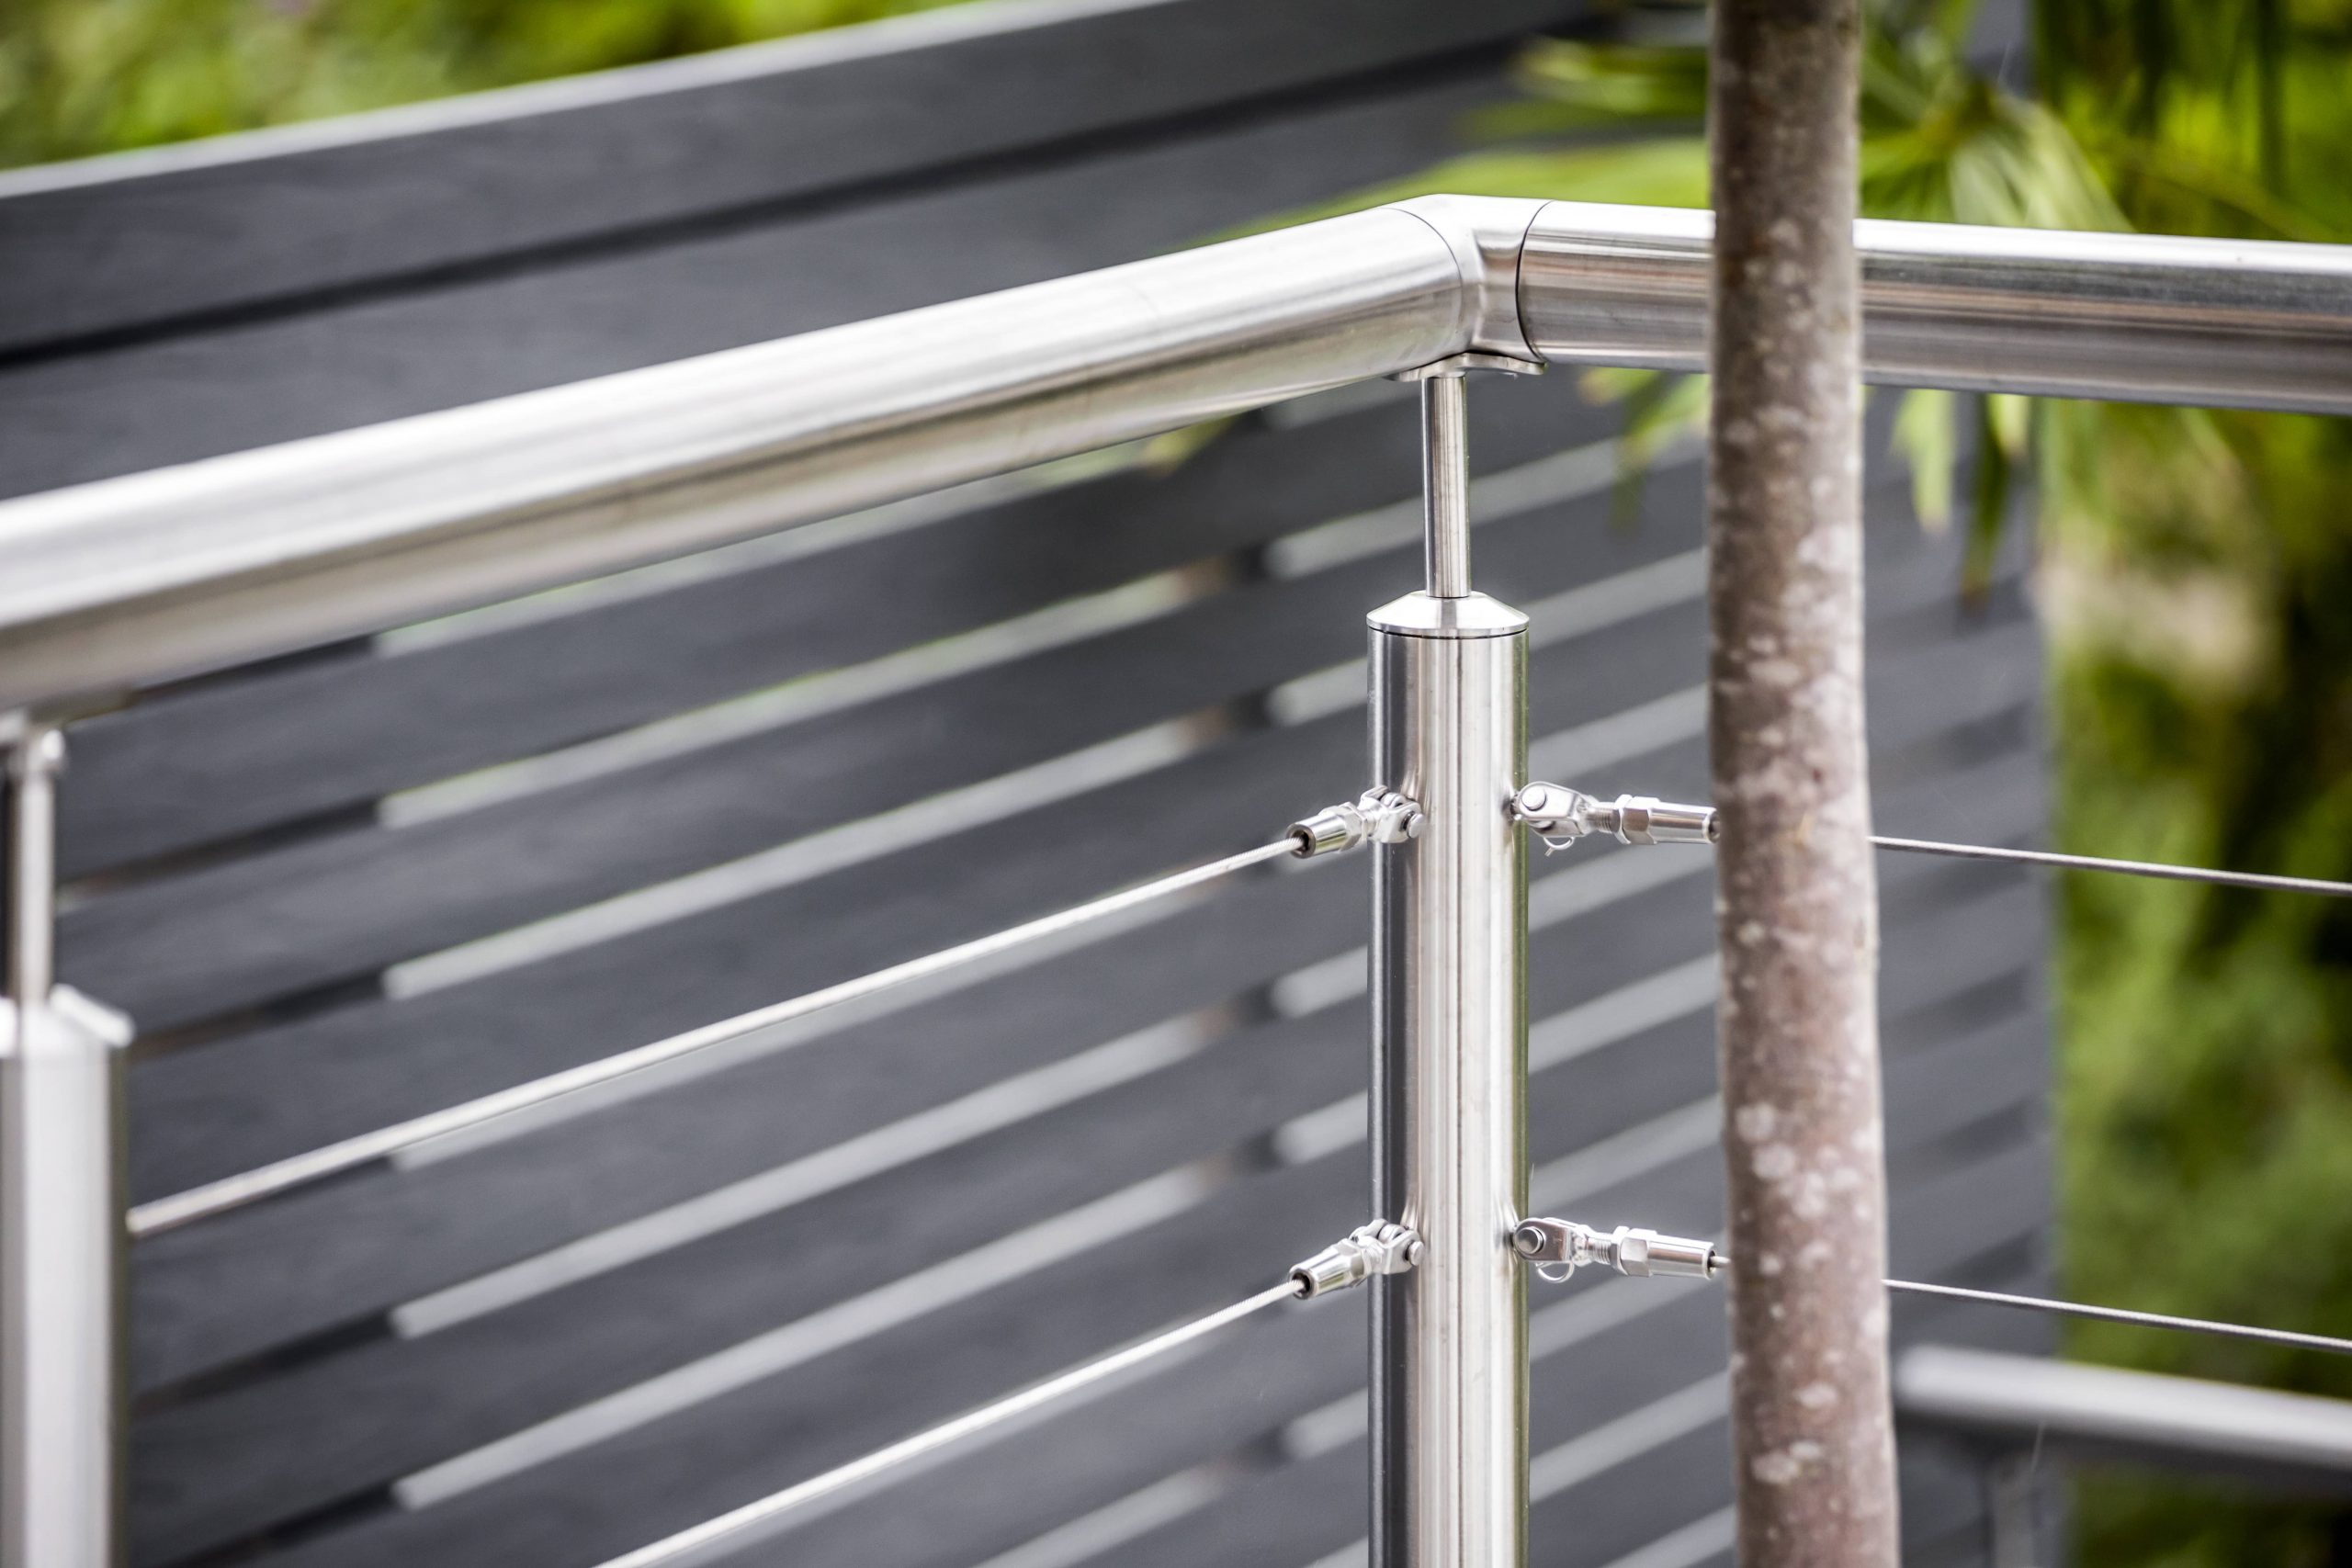 steel balustrade with grey composite decking in background